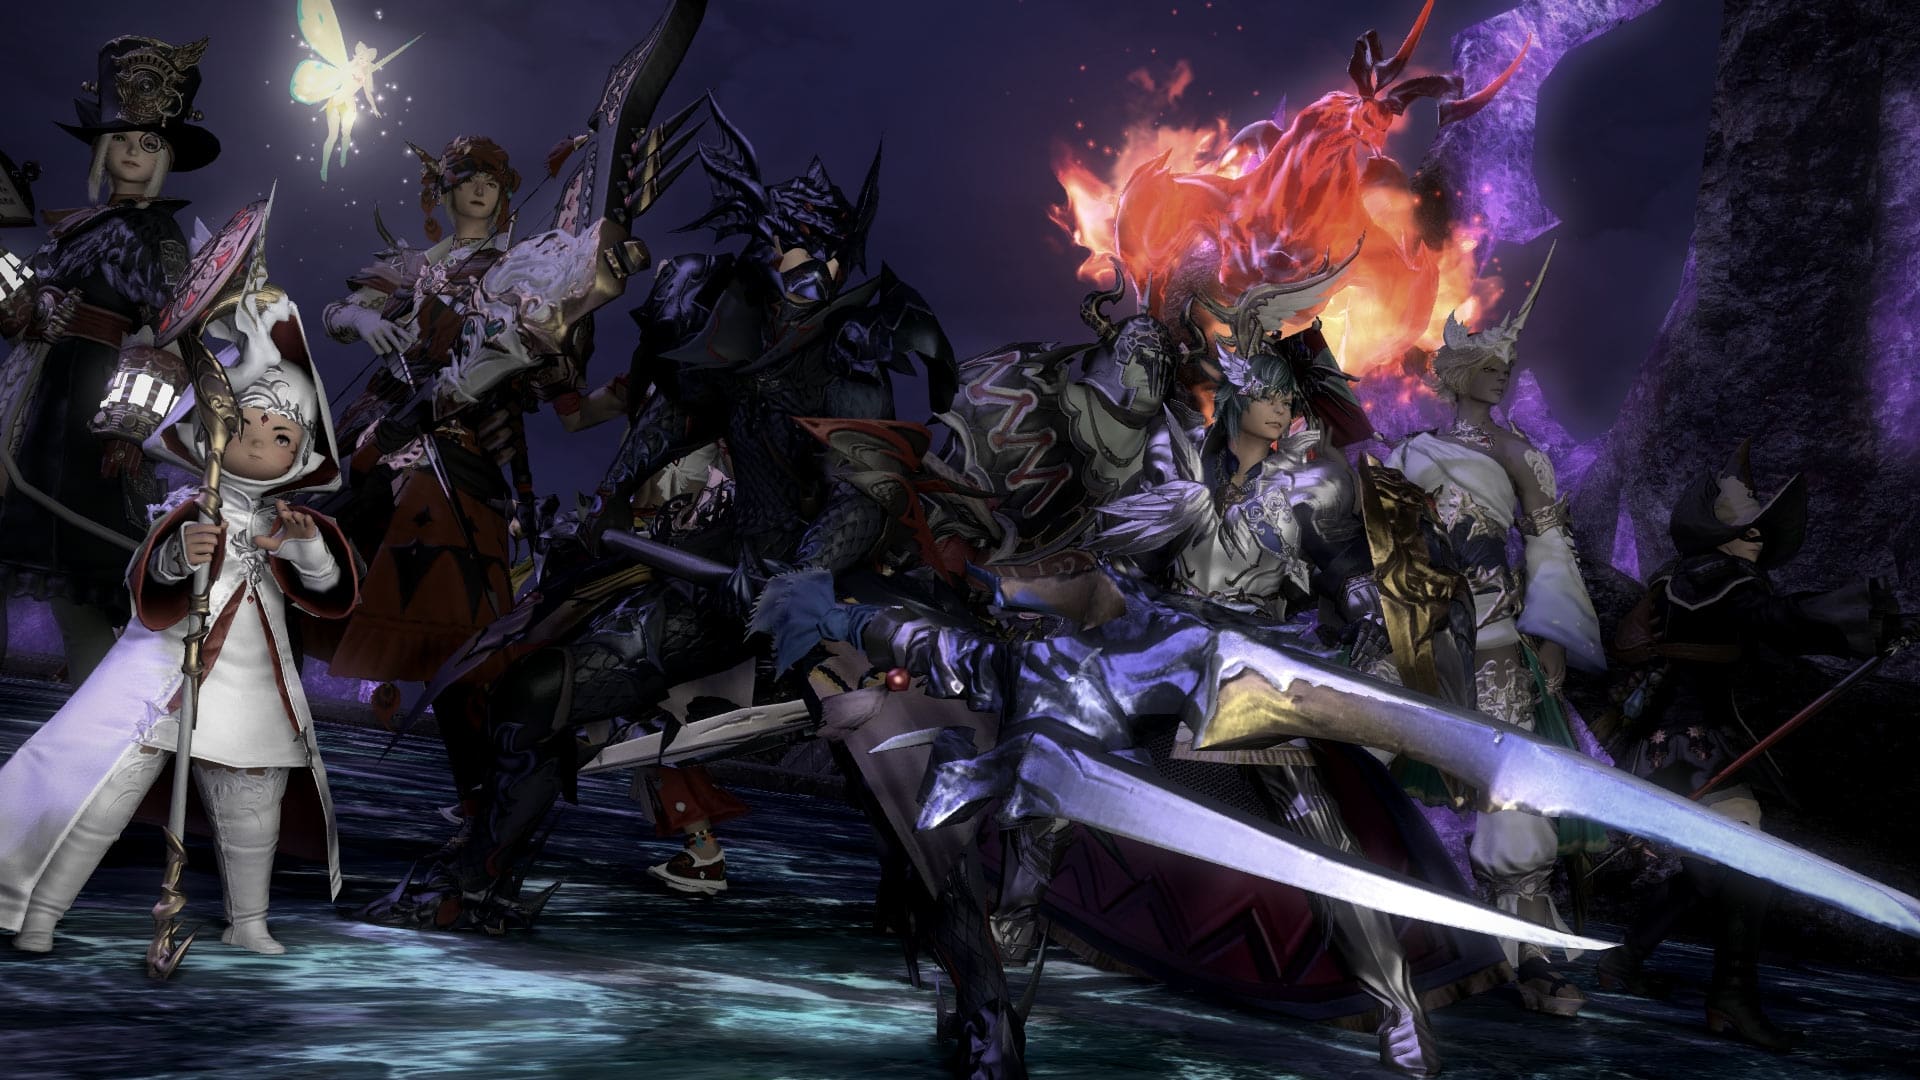 Final Fantasy Xiv Free Trial Extended To Heavensward More Options